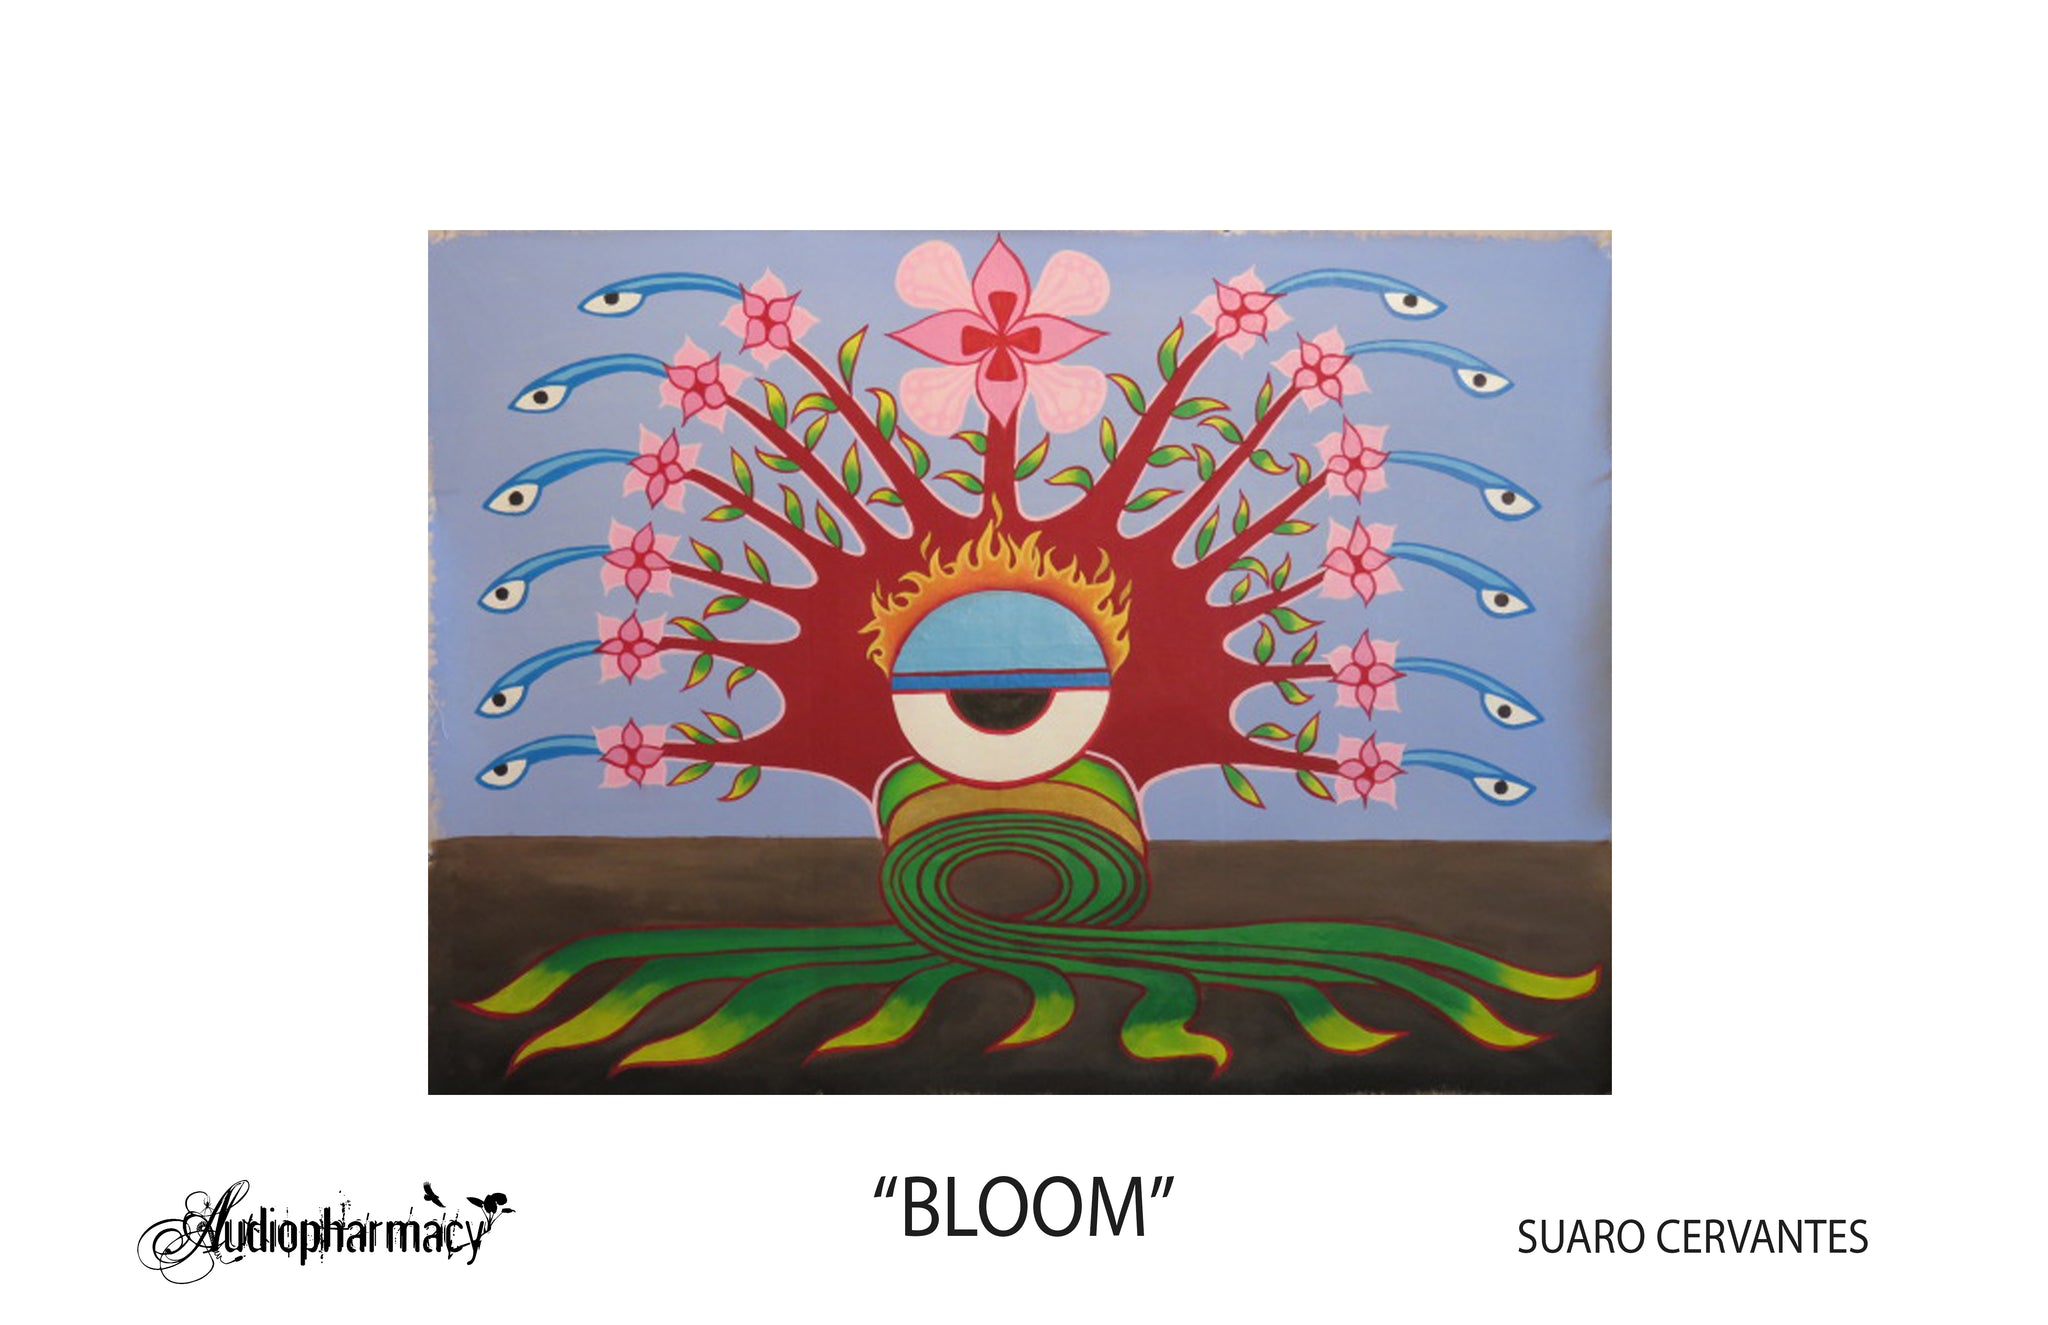 MOMENT - "BLOOM" POSTER BY SUARO CERVANTES